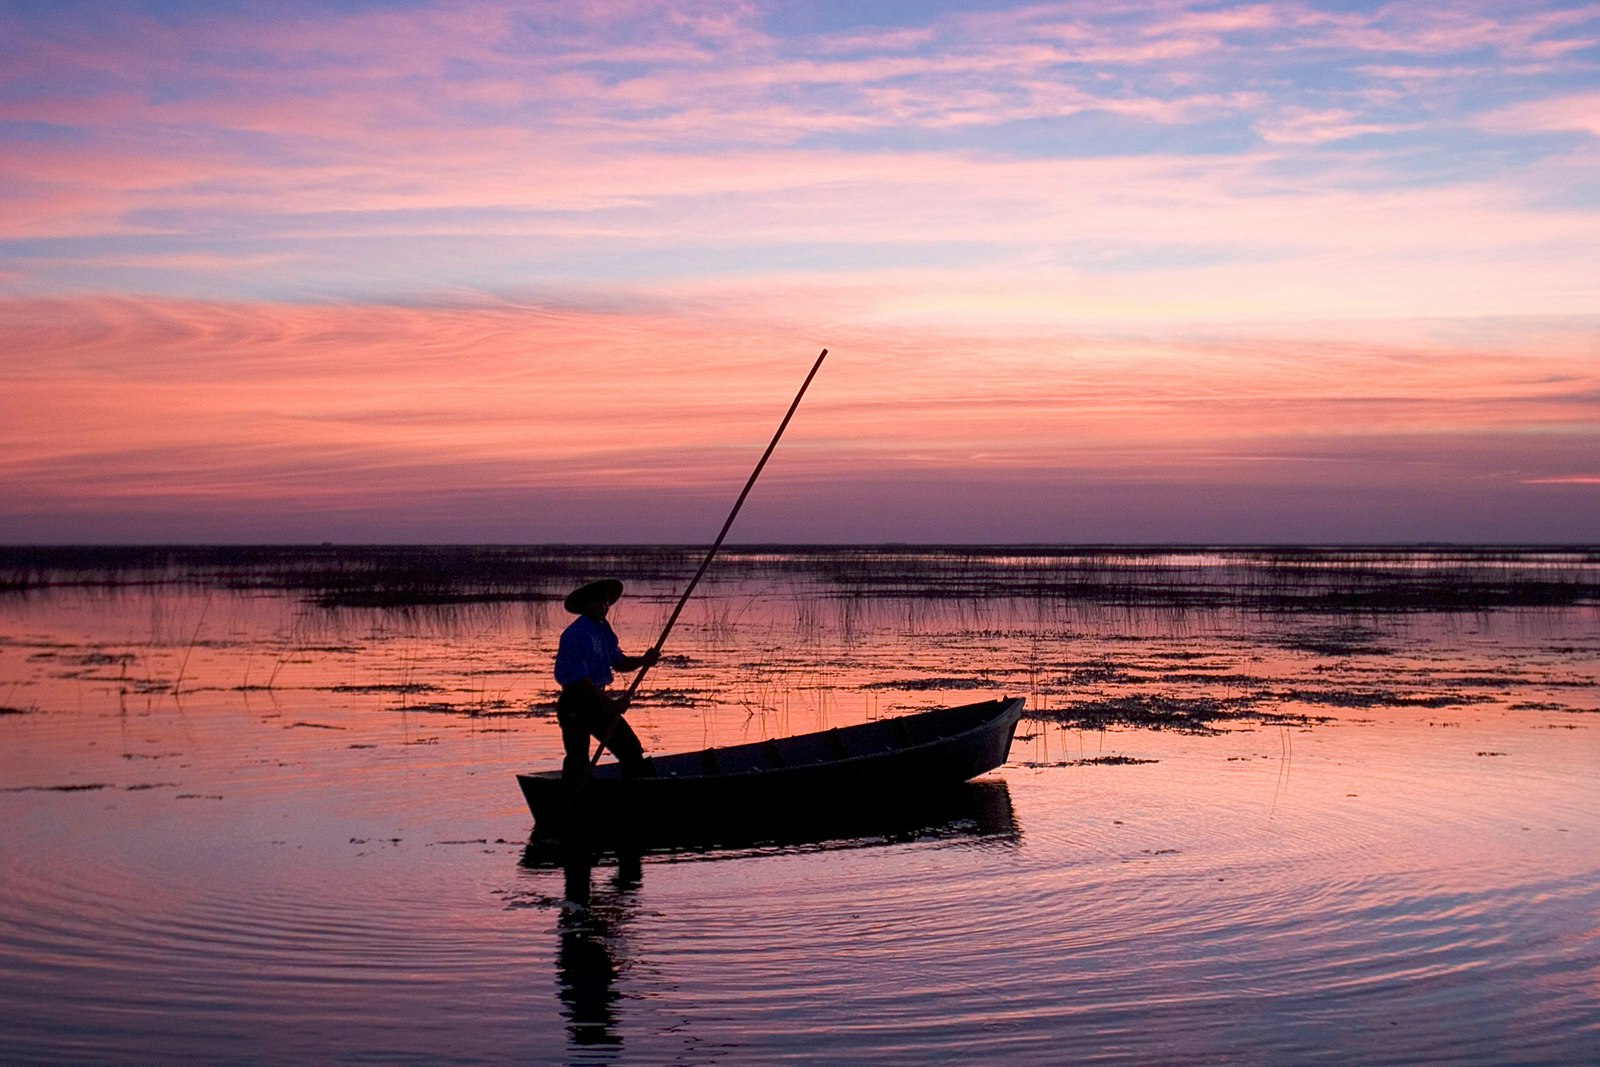 A silhouette of a person wearing a hat, standing in a boat holding a long pole at sunset. The wetlands reflect pink and purple. Iberá Wetlands, Northeast Argentina.